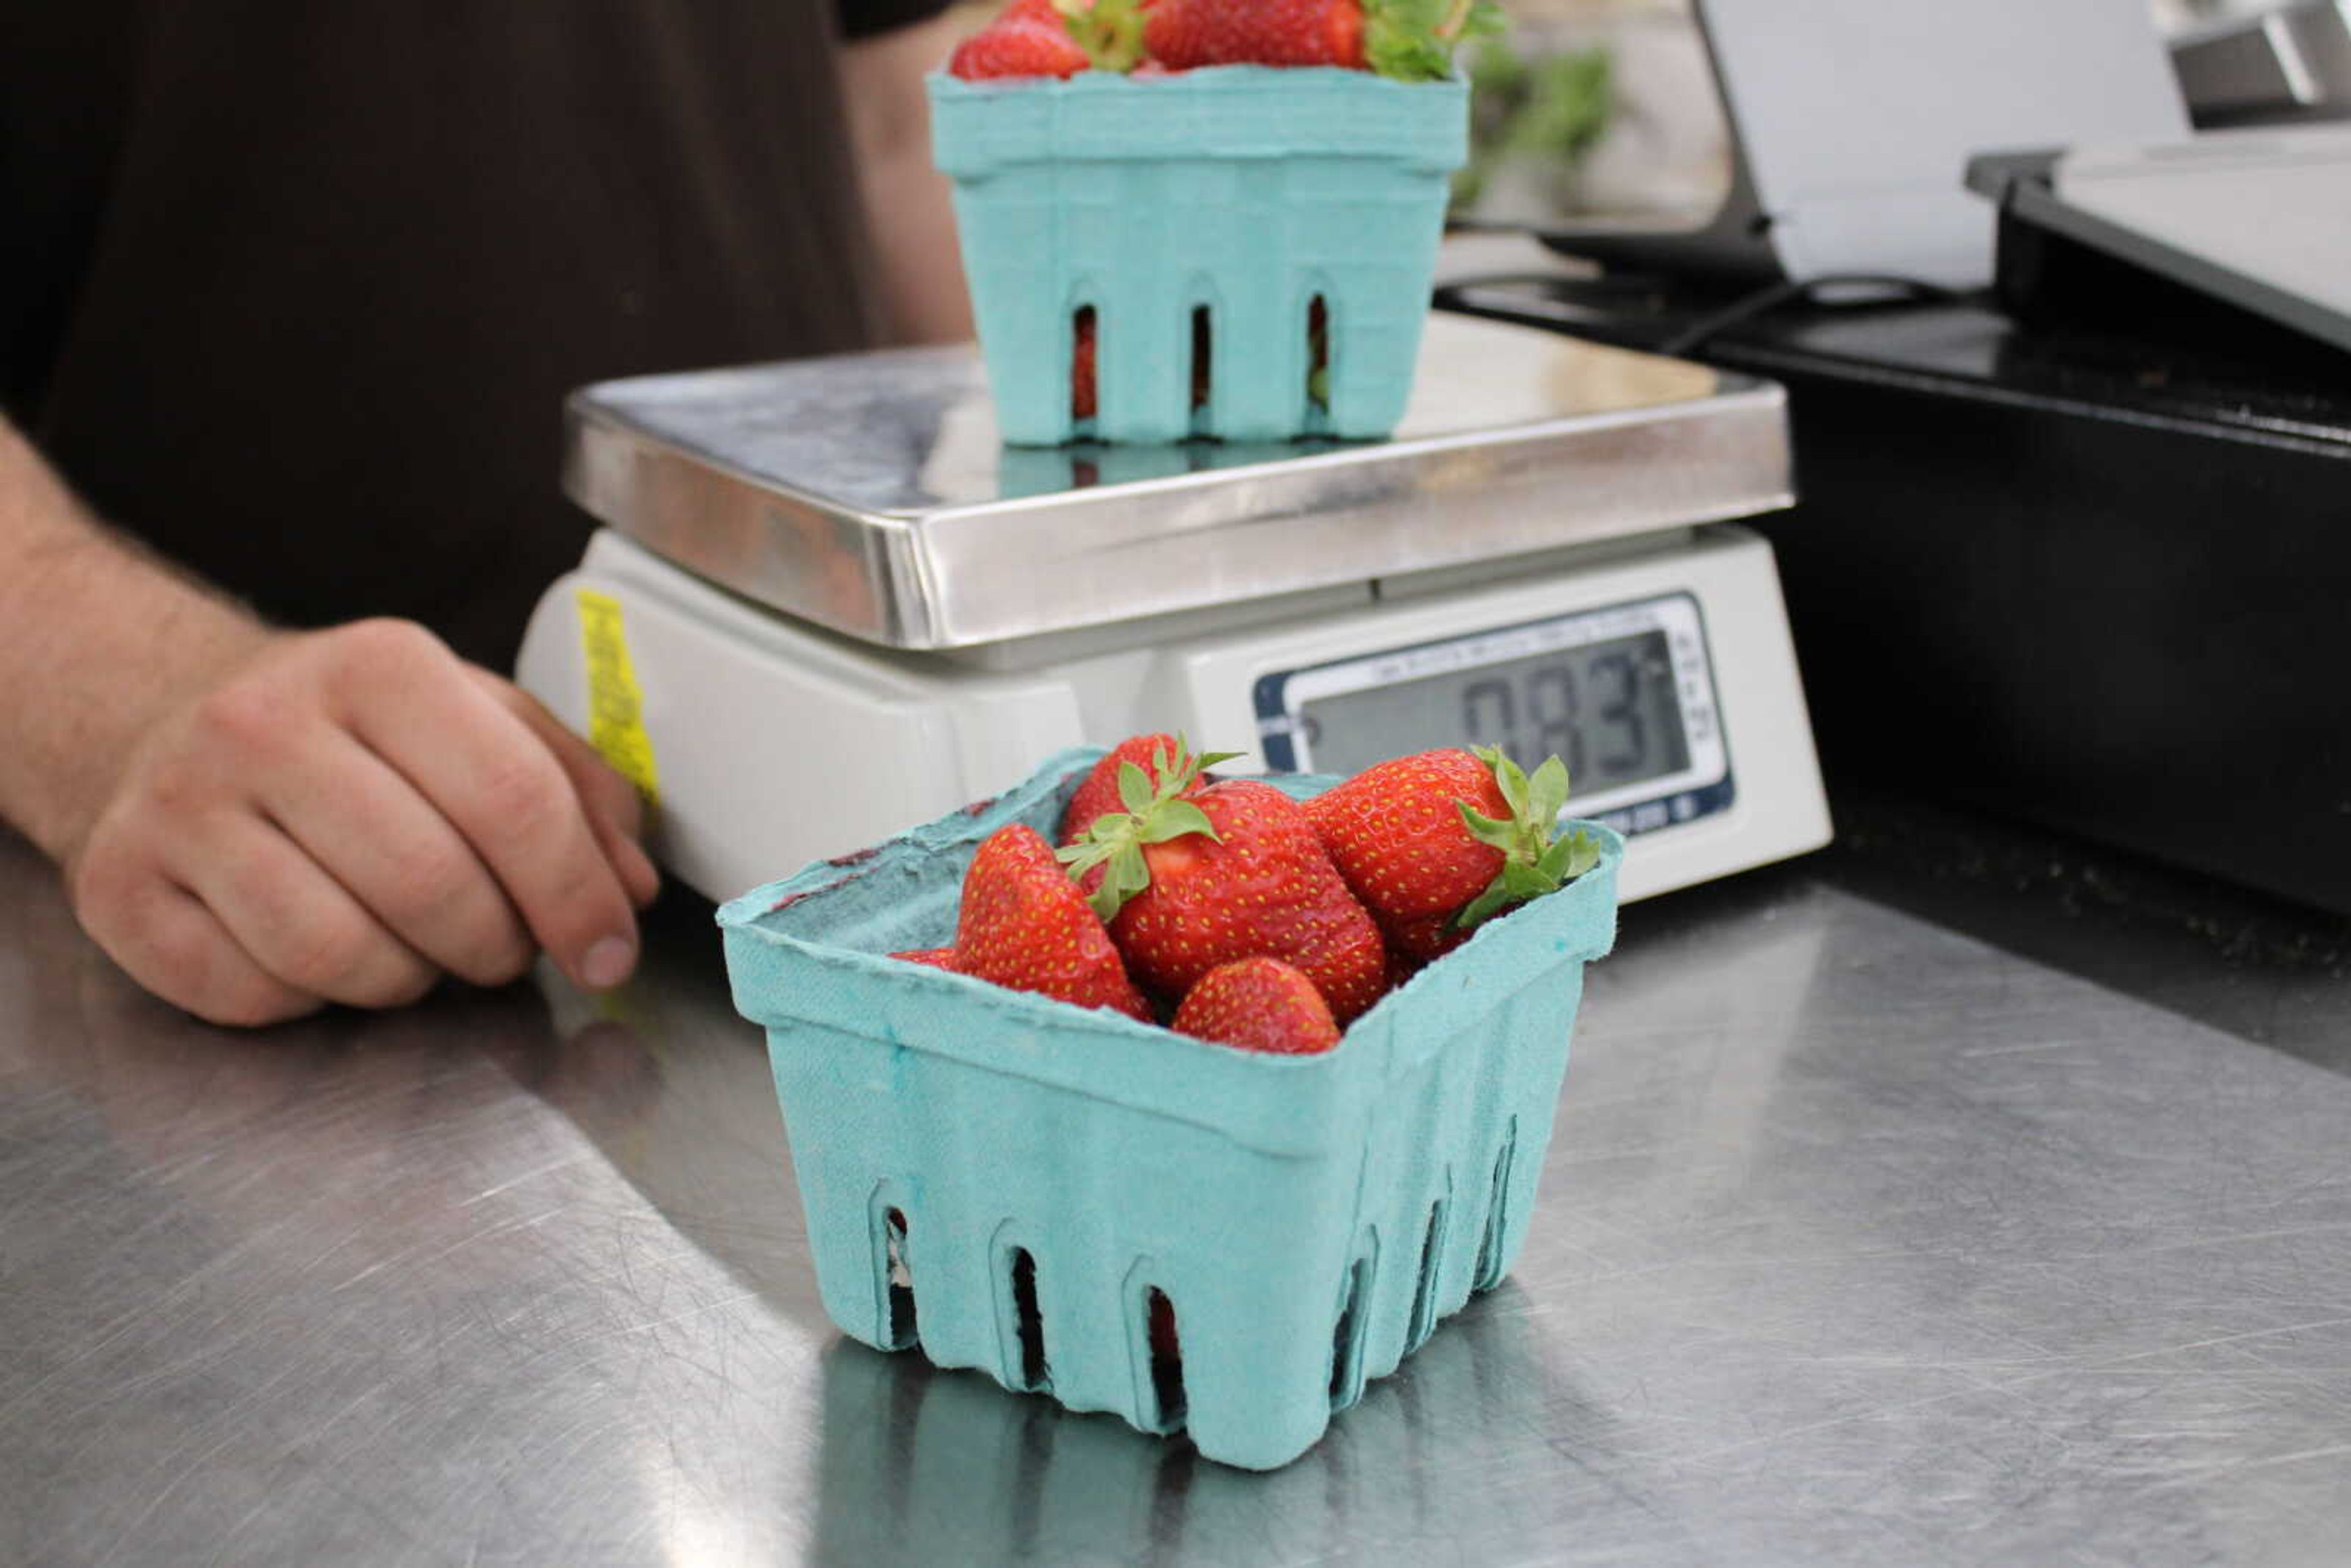 Strawberry shortage spurs innovation in local supply chain